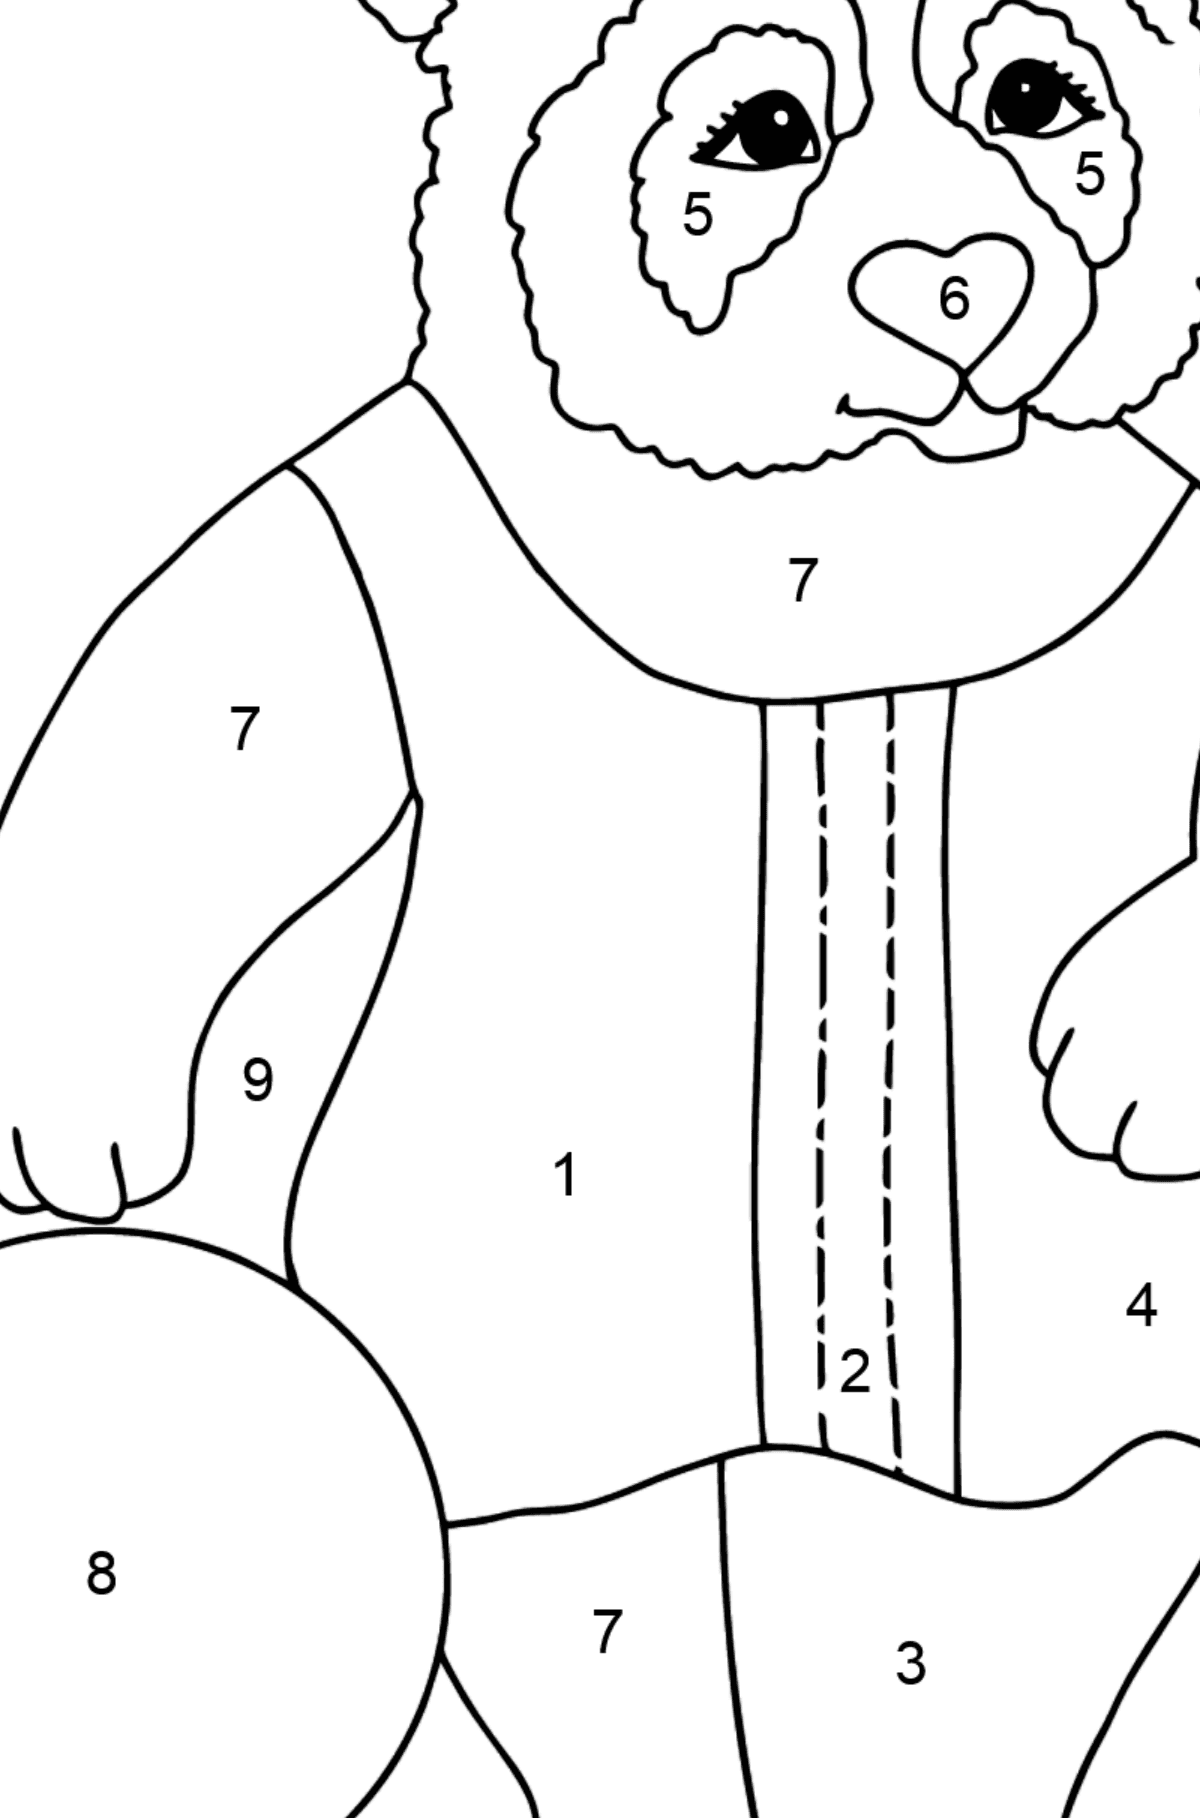 Panda For Babies coloring page - Coloring by Numbers for Kids